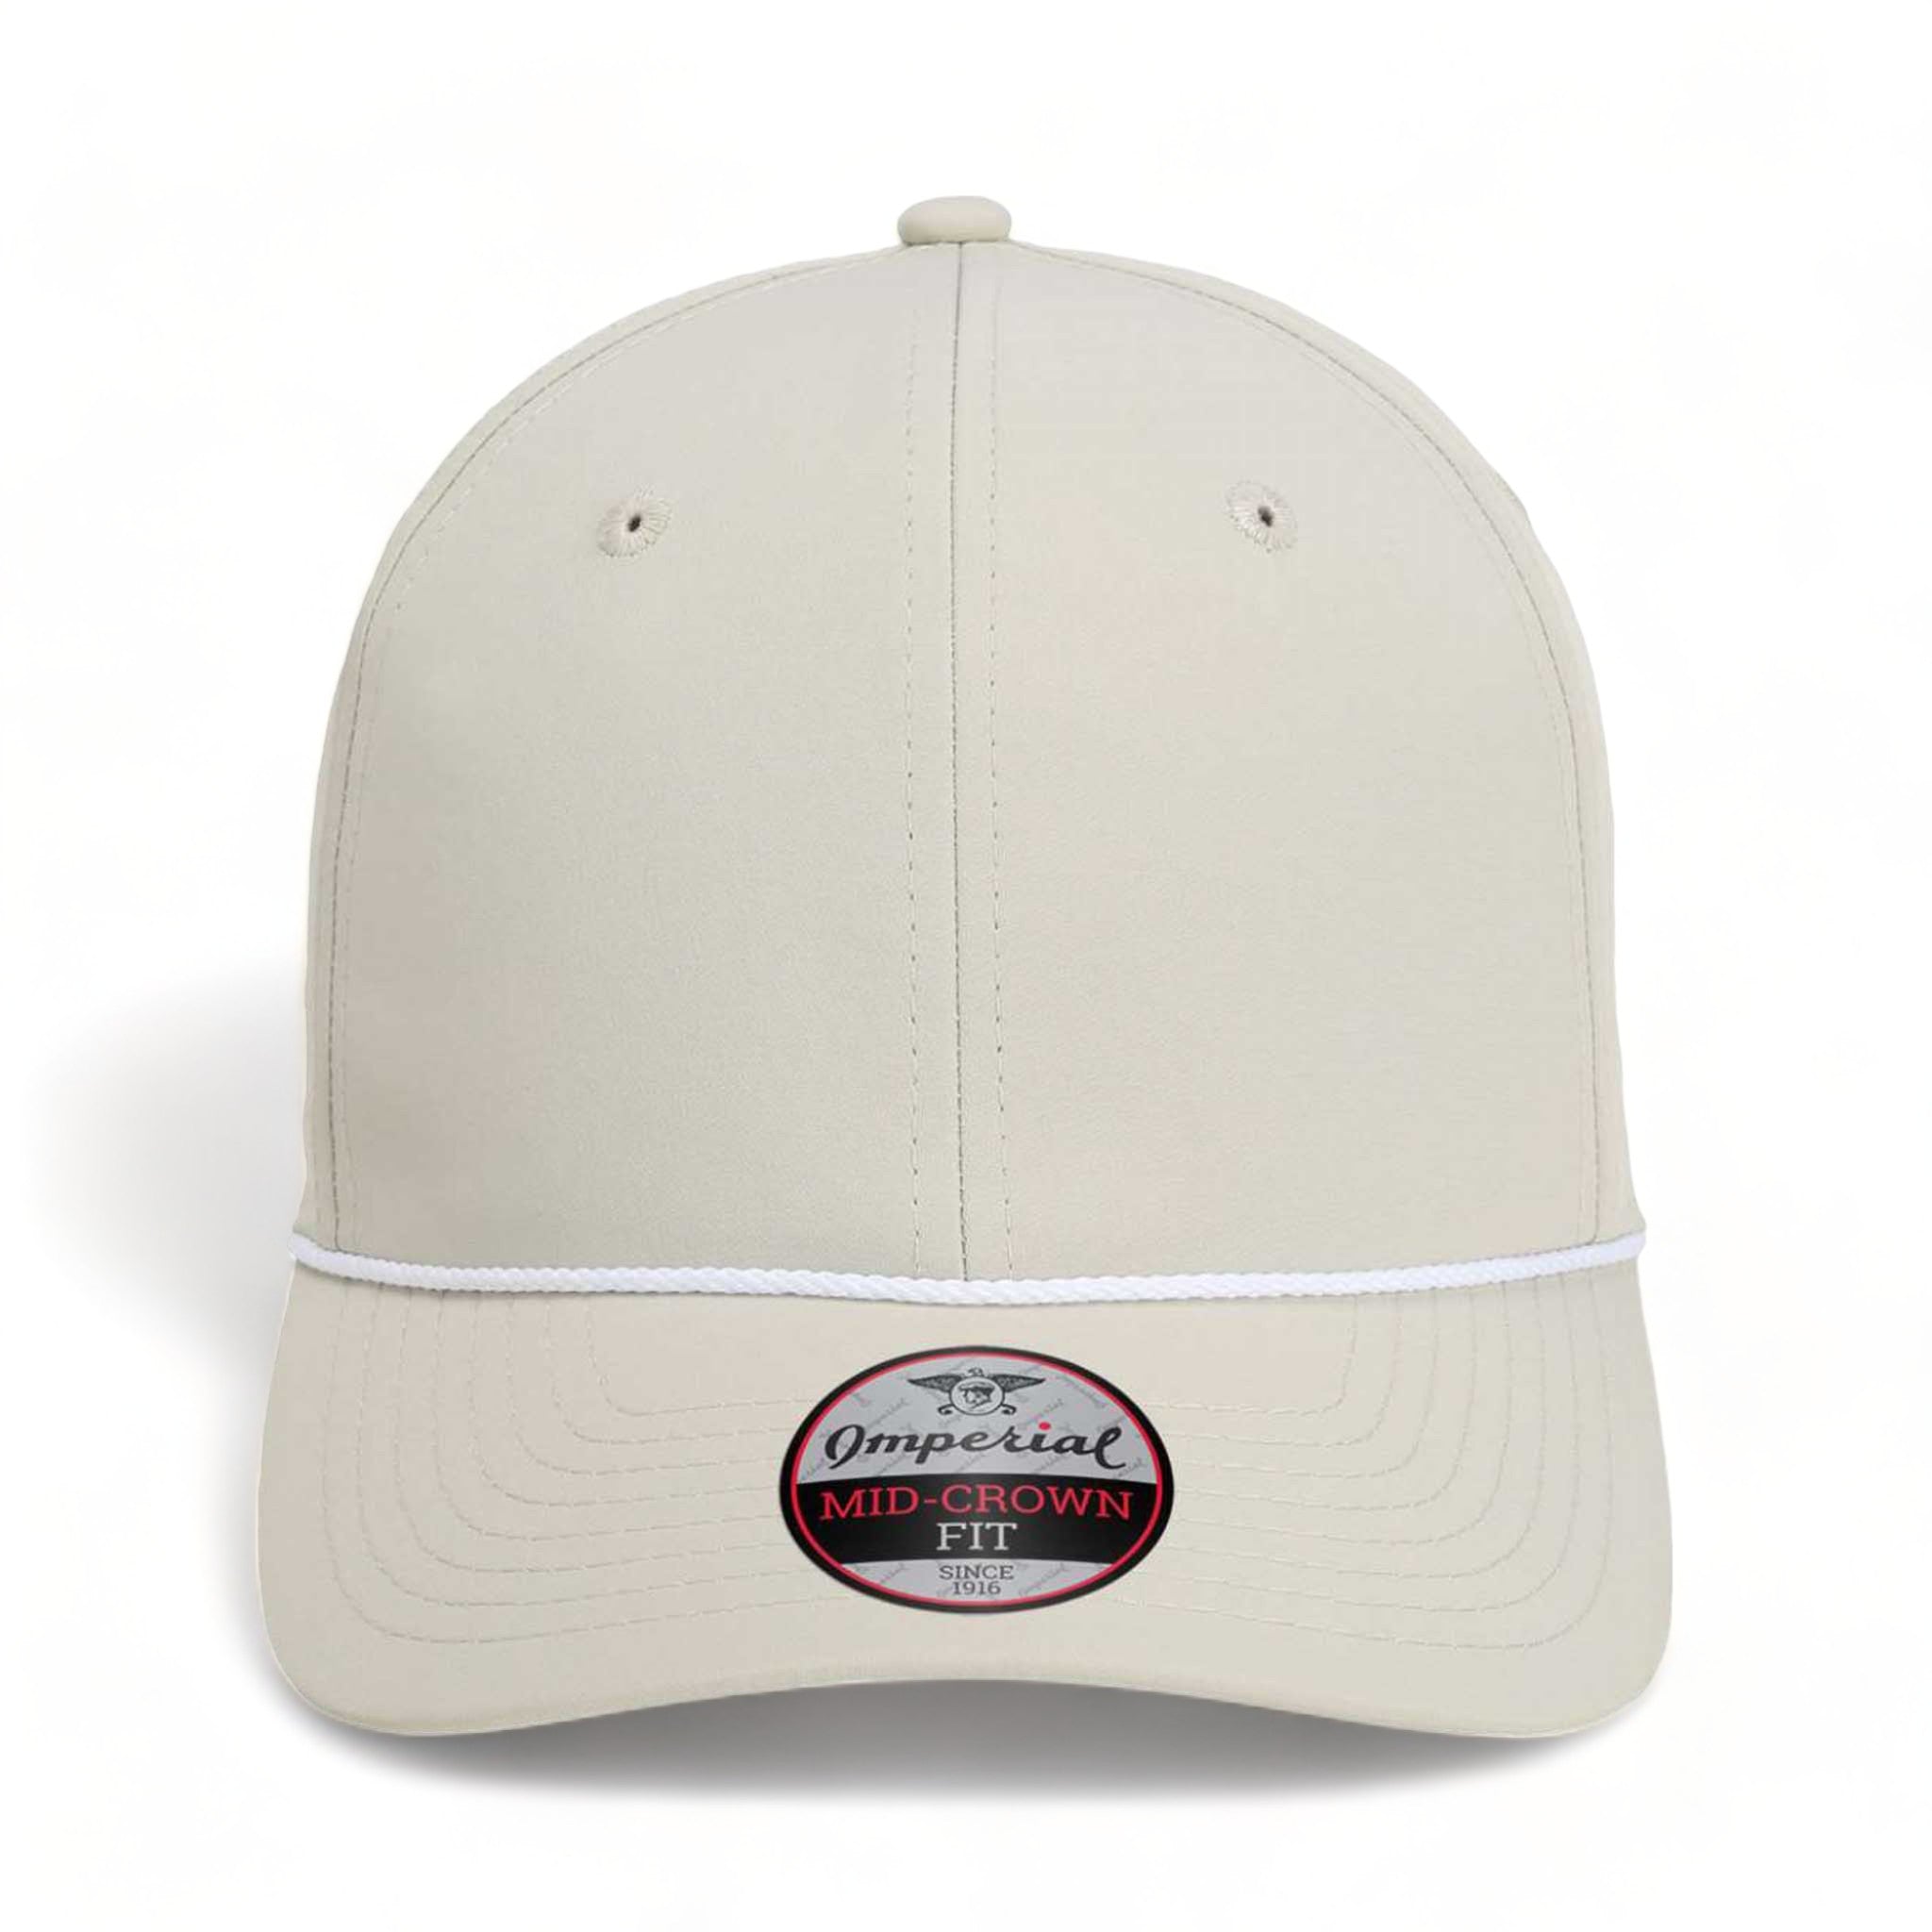 Front view of Imperial 7054 custom hat in putty and white